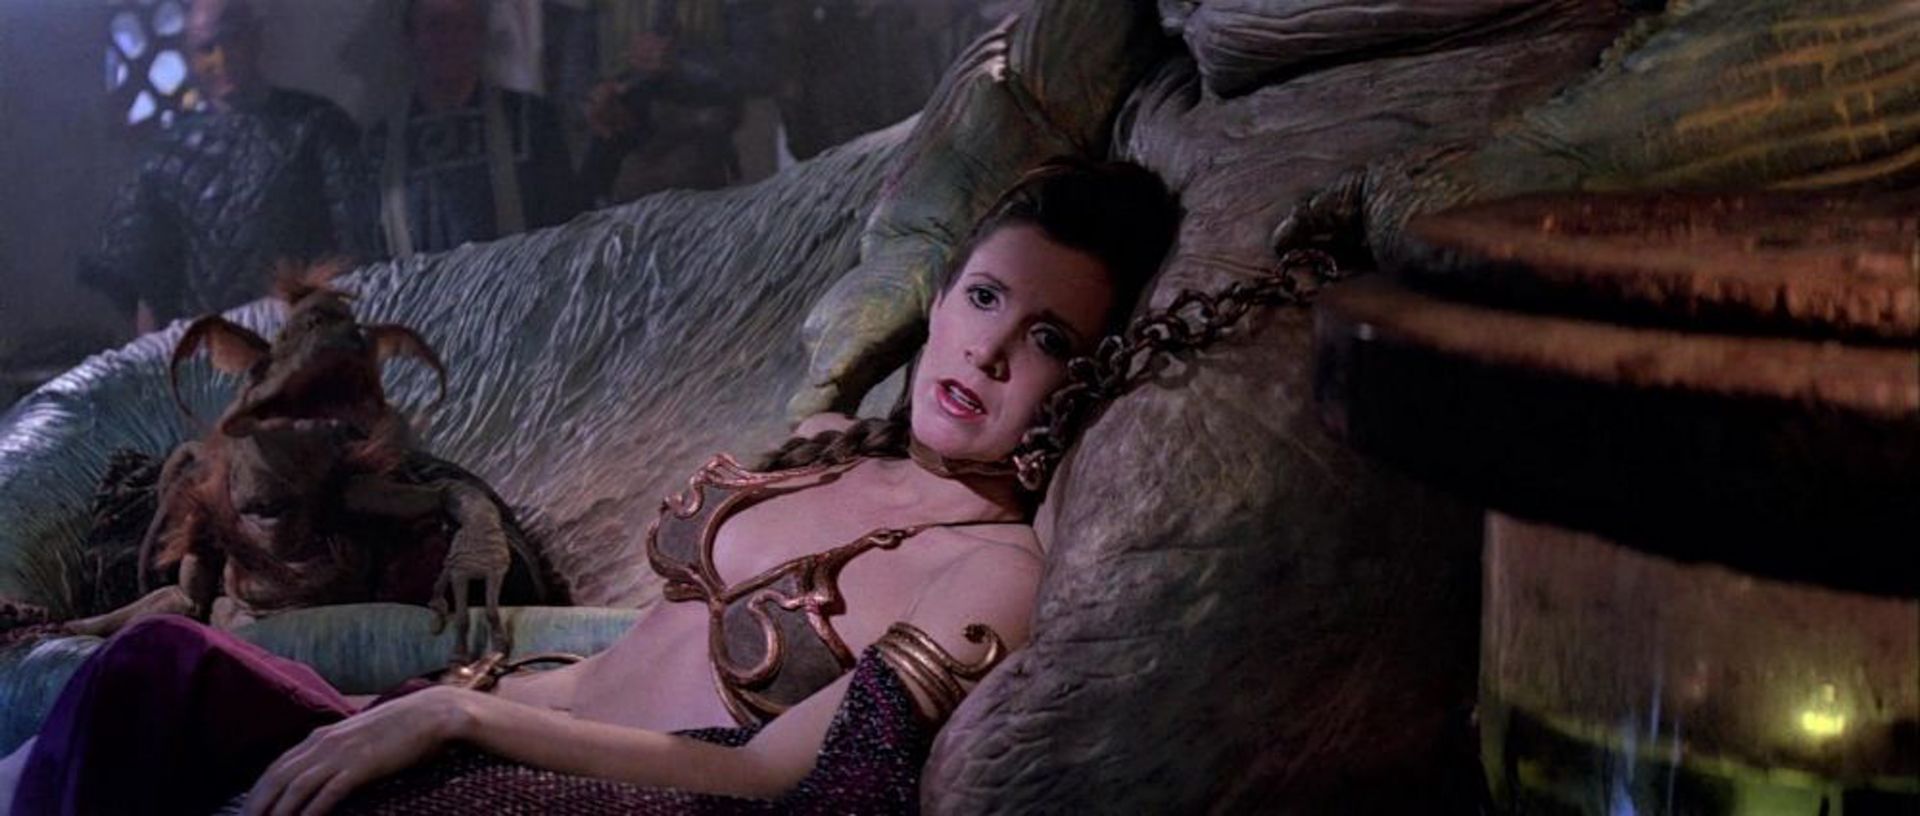 STAR WARS - RETURN OF THE JEDI | CARRIE FISHER "PRINCESS LEIA ORGANA" JABBA THE HUTT SLAVE COSTUME P - Image 51 of 54